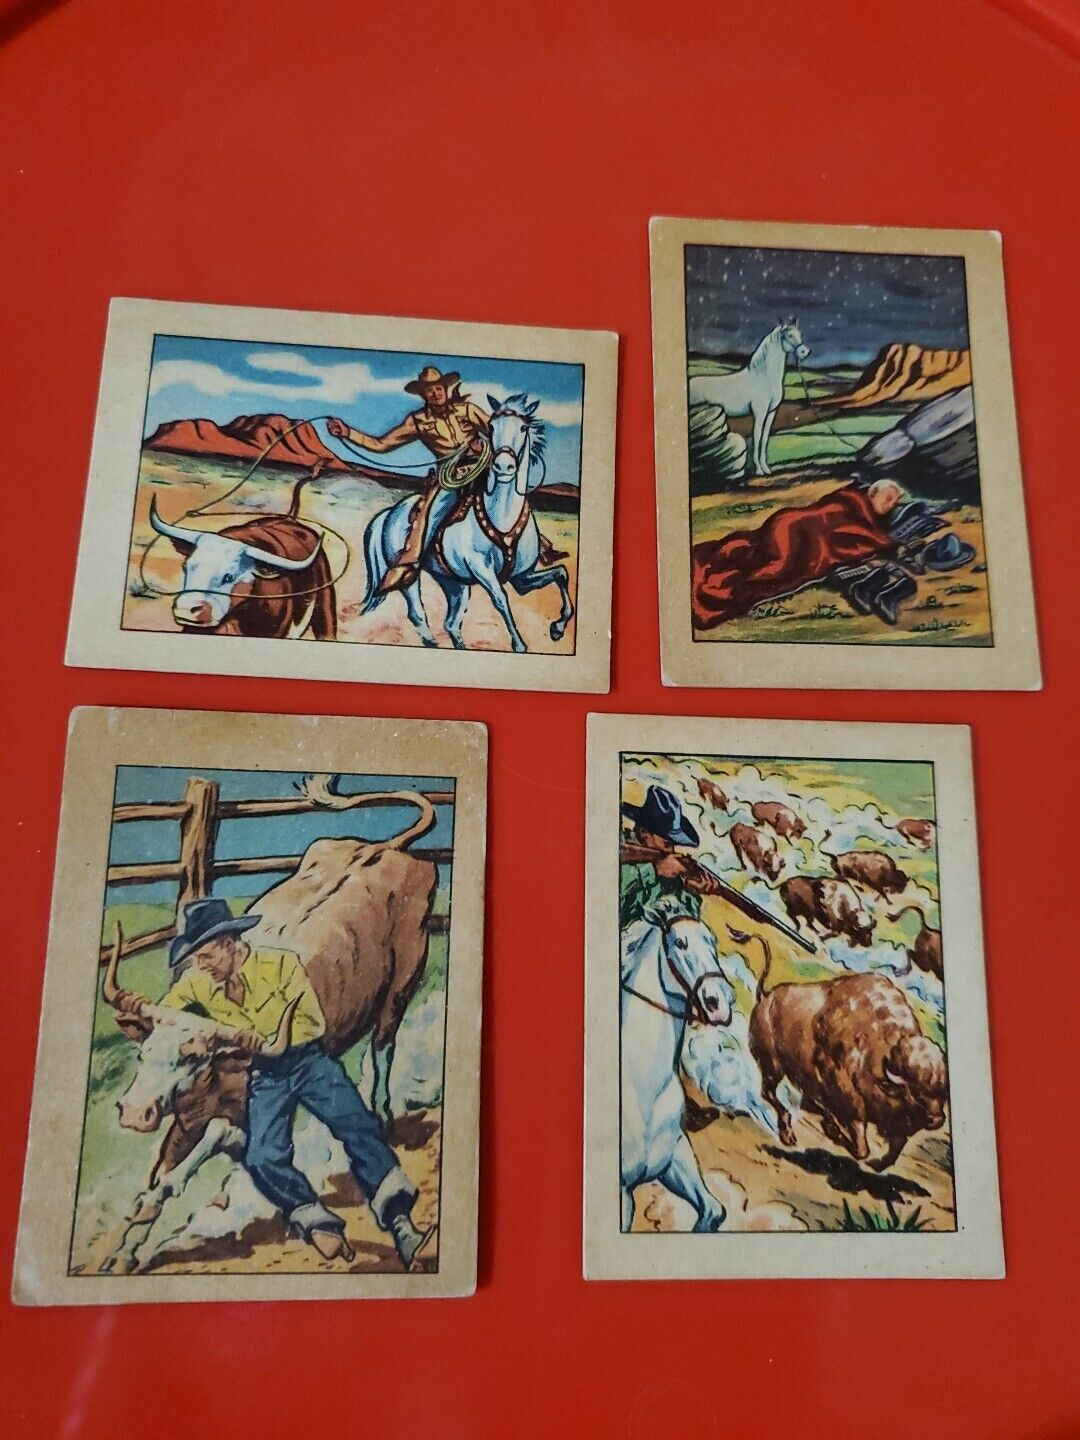 1951 POST CEREAL HOPALONG CASSIDY CARDS - 4 card lot - # 8, 19, 26, 35